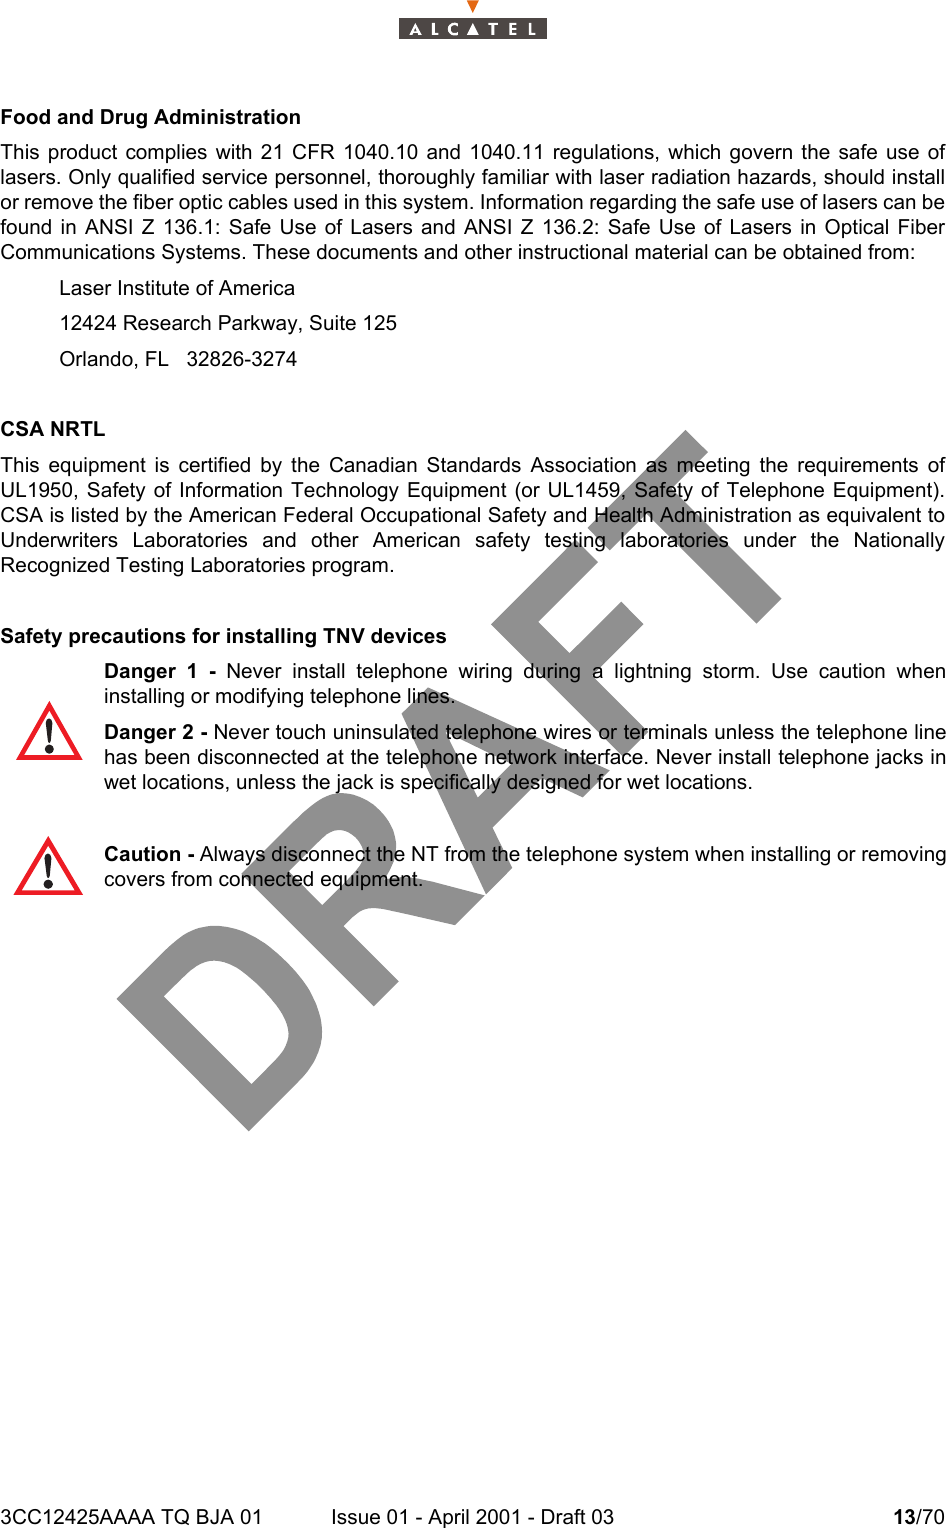 3CC12425AAAA TQ BJA 01 Issue 01 - April 2001 - Draft 03 13/7014Food and Drug Administration This product complies with 21 CFR 1040.10 and 1040.11 regulations, which govern the safe use oflasers. Only qualified service personnel, thoroughly familiar with laser radiation hazards, should installor remove the fiber optic cables used in this system. Information regarding the safe use of lasers can befound in ANSI Z 136.1: Safe Use of Lasers and ANSI Z 136.2: Safe Use of Lasers in Optical FiberCommunications Systems. These documents and other instructional material can be obtained from:Laser Institute of America12424 Research Parkway, Suite 125Orlando, FL   32826-3274 CSA NRTLThis equipment is certified by the Canadian Standards Association as meeting the requirements ofUL1950, Safety of Information Technology Equipment (or UL1459, Safety of Telephone Equipment).CSA is listed by the American Federal Occupational Safety and Health Administration as equivalent toUnderwriters Laboratories and other American safety testing laboratories under the NationallyRecognized Testing Laboratories program.Safety precautions for installing TNV devicesDanger 1 - Never install telephone wiring during a lightning storm. Use caution wheninstalling or modifying telephone lines. Danger 2 - Never touch uninsulated telephone wires or terminals unless the telephone linehas been disconnected at the telephone network interface. Never install telephone jacks inwet locations, unless the jack is specifically designed for wet locations.Caution - Always disconnect the NT from the telephone system when installing or removingcovers from connected equipment.